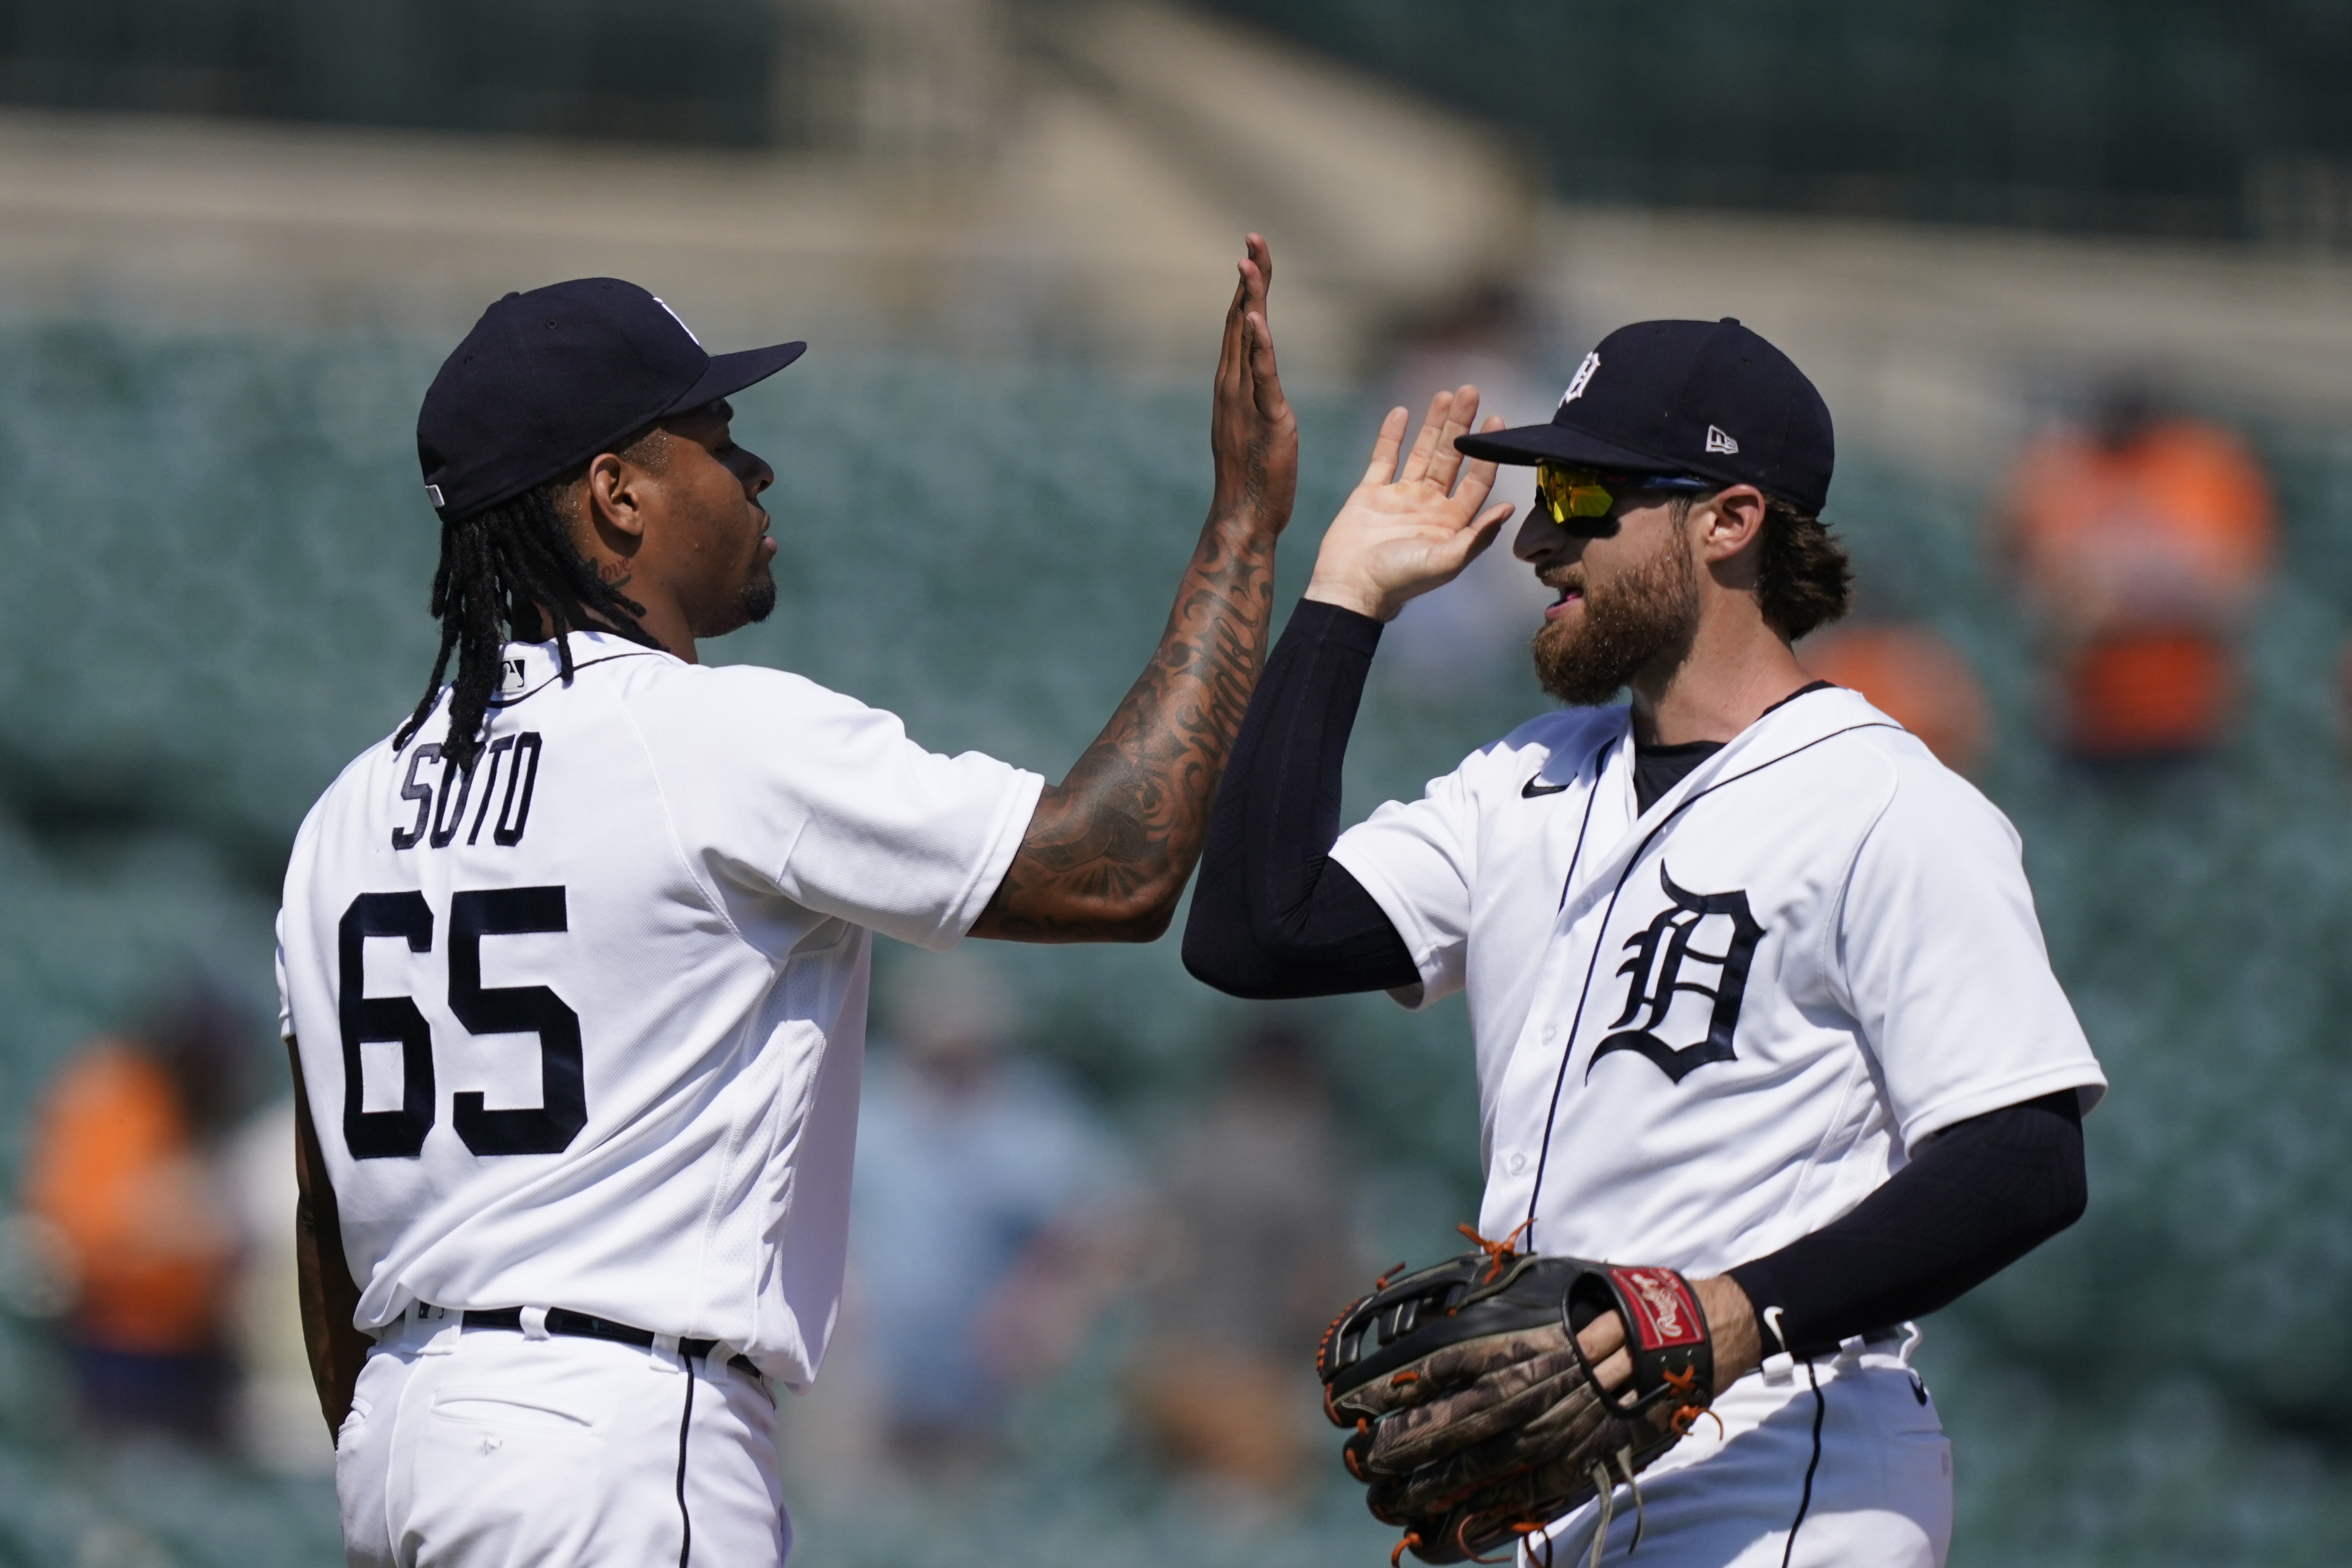 Tigers' 2022 schedule: Home opener is April 8 vs. White Sox 